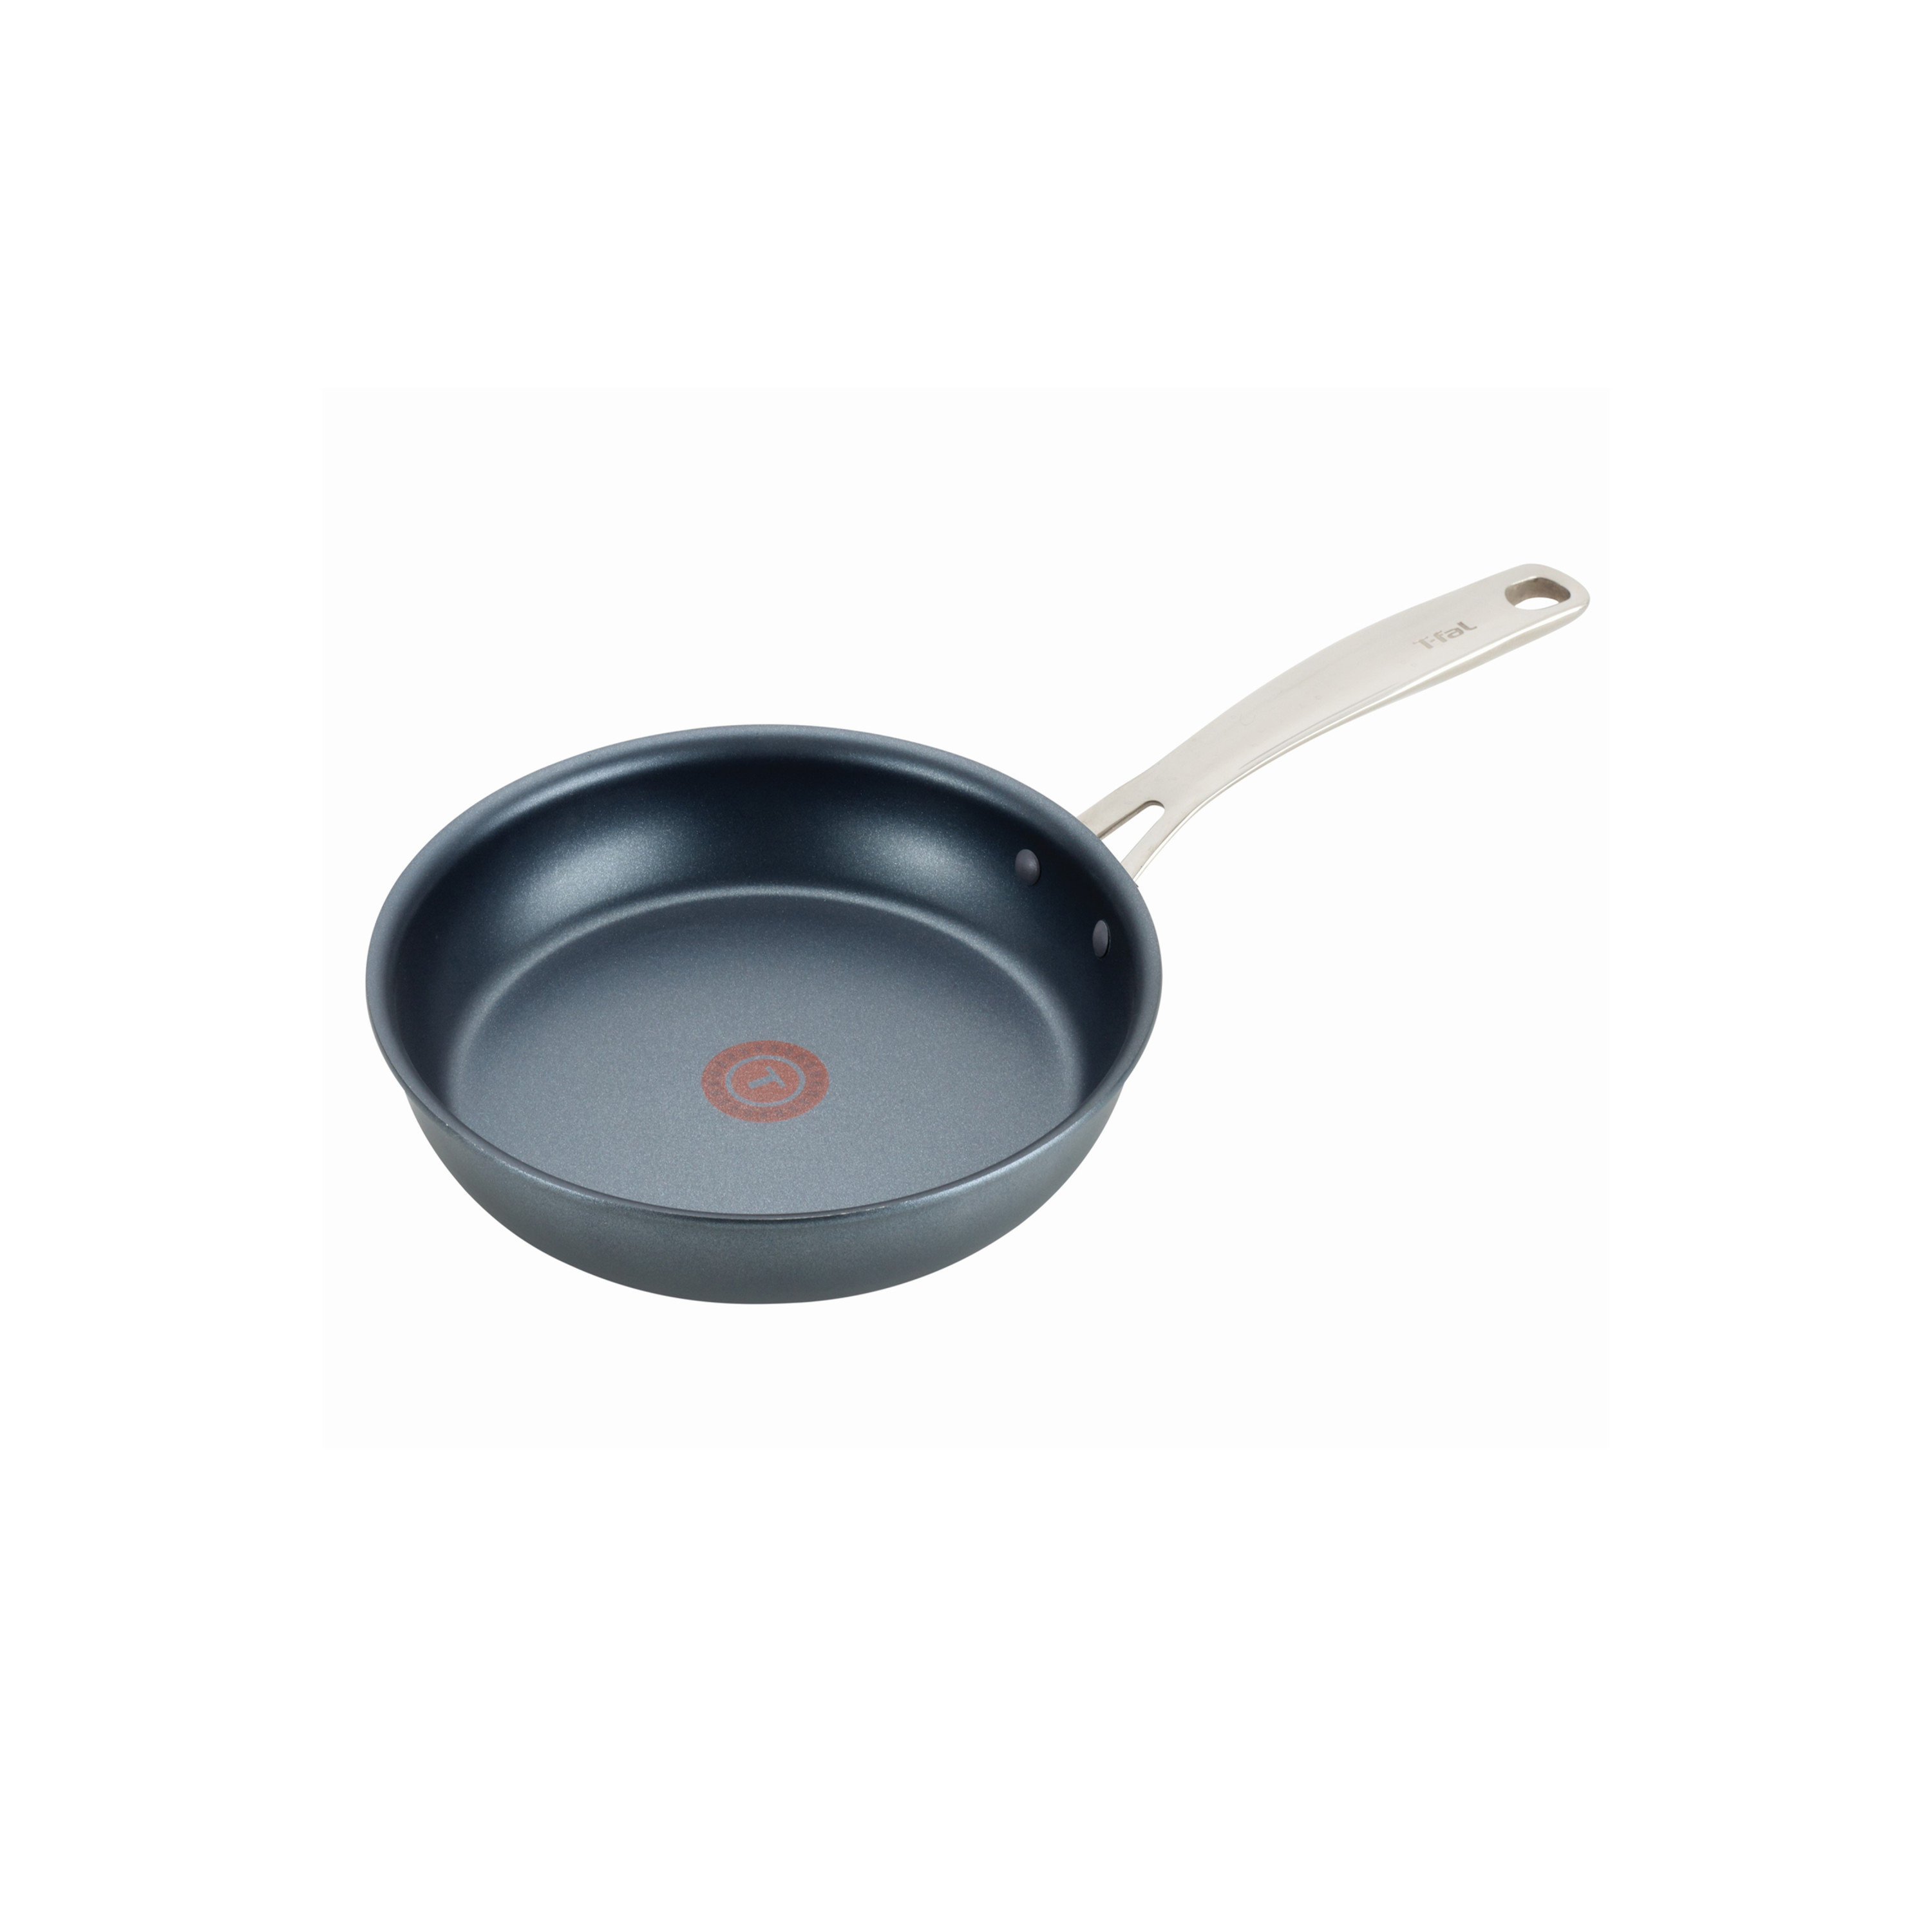  T-fal Ultimate Hard Anodized Nonstick Fry Pan Set 8